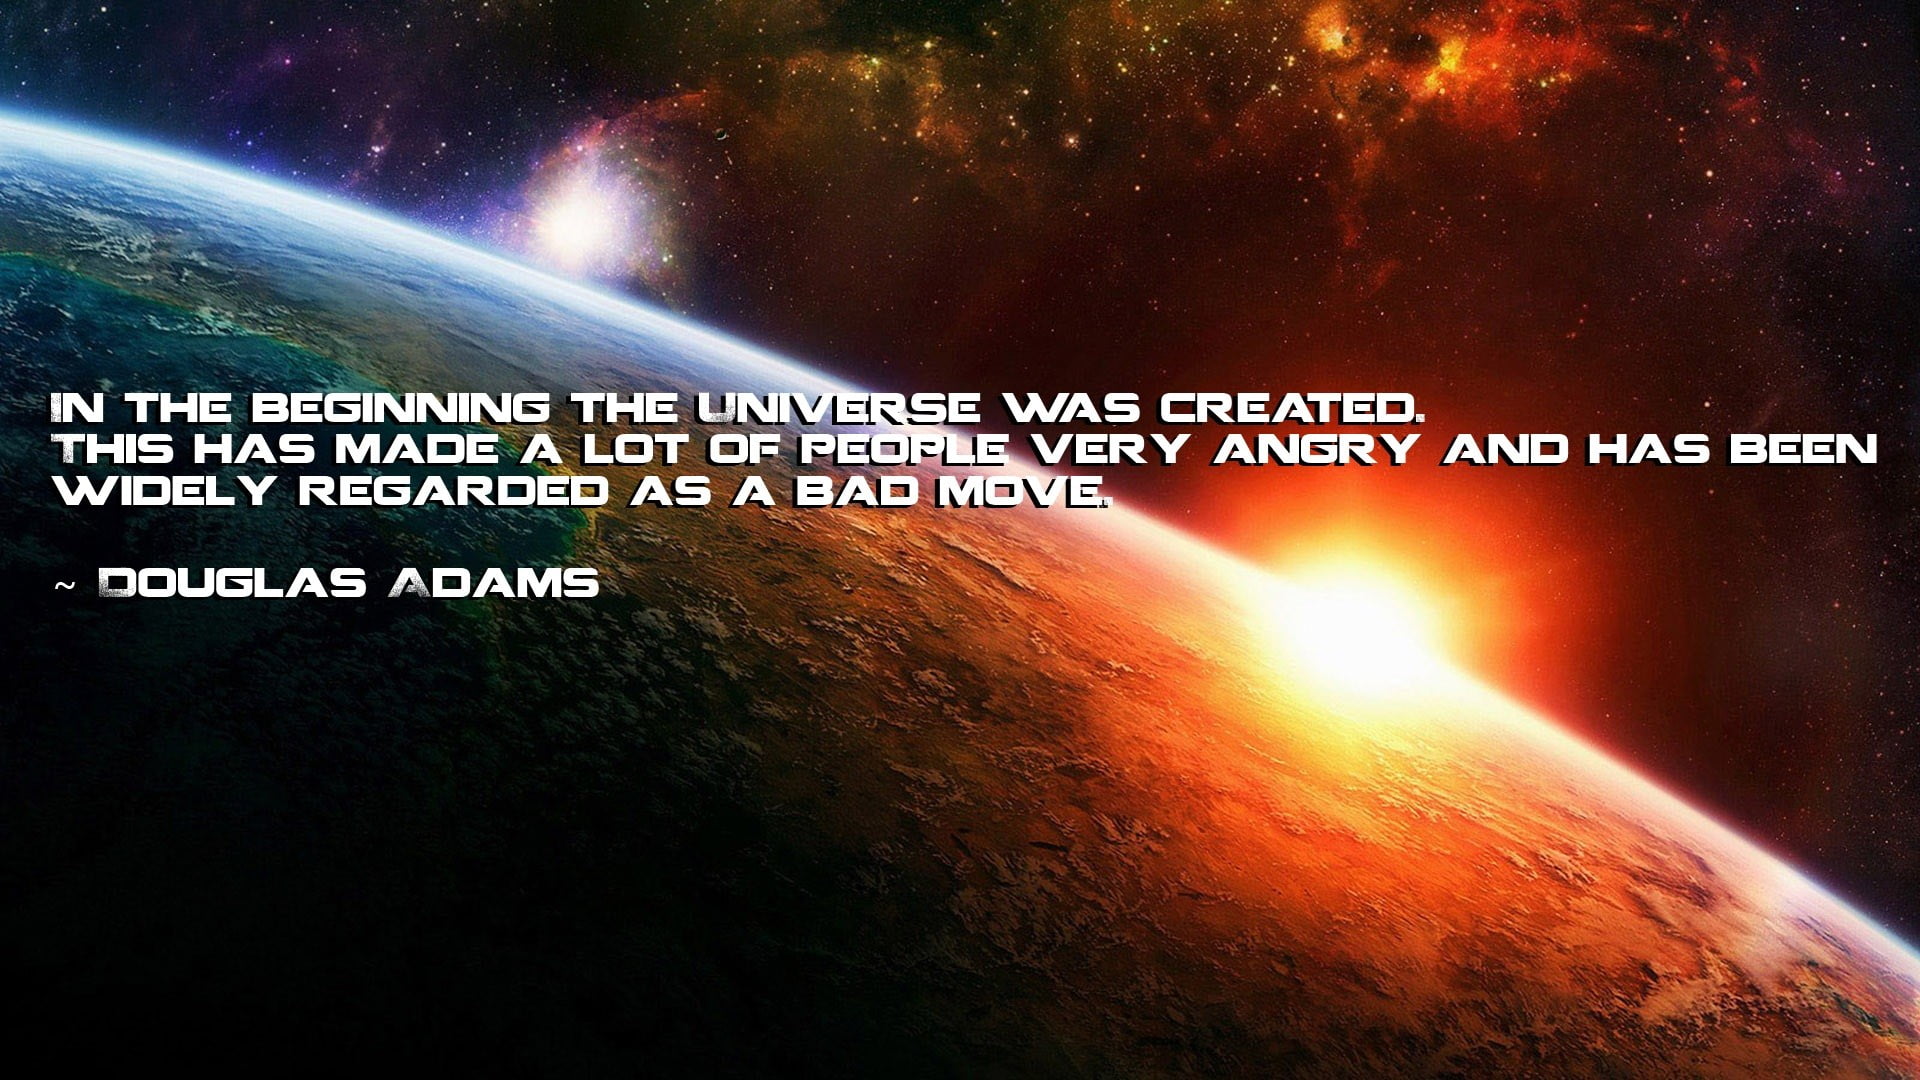 in the beginning the universe was created text, quote, humor, The Hitchhiker's Guide to the Galaxy